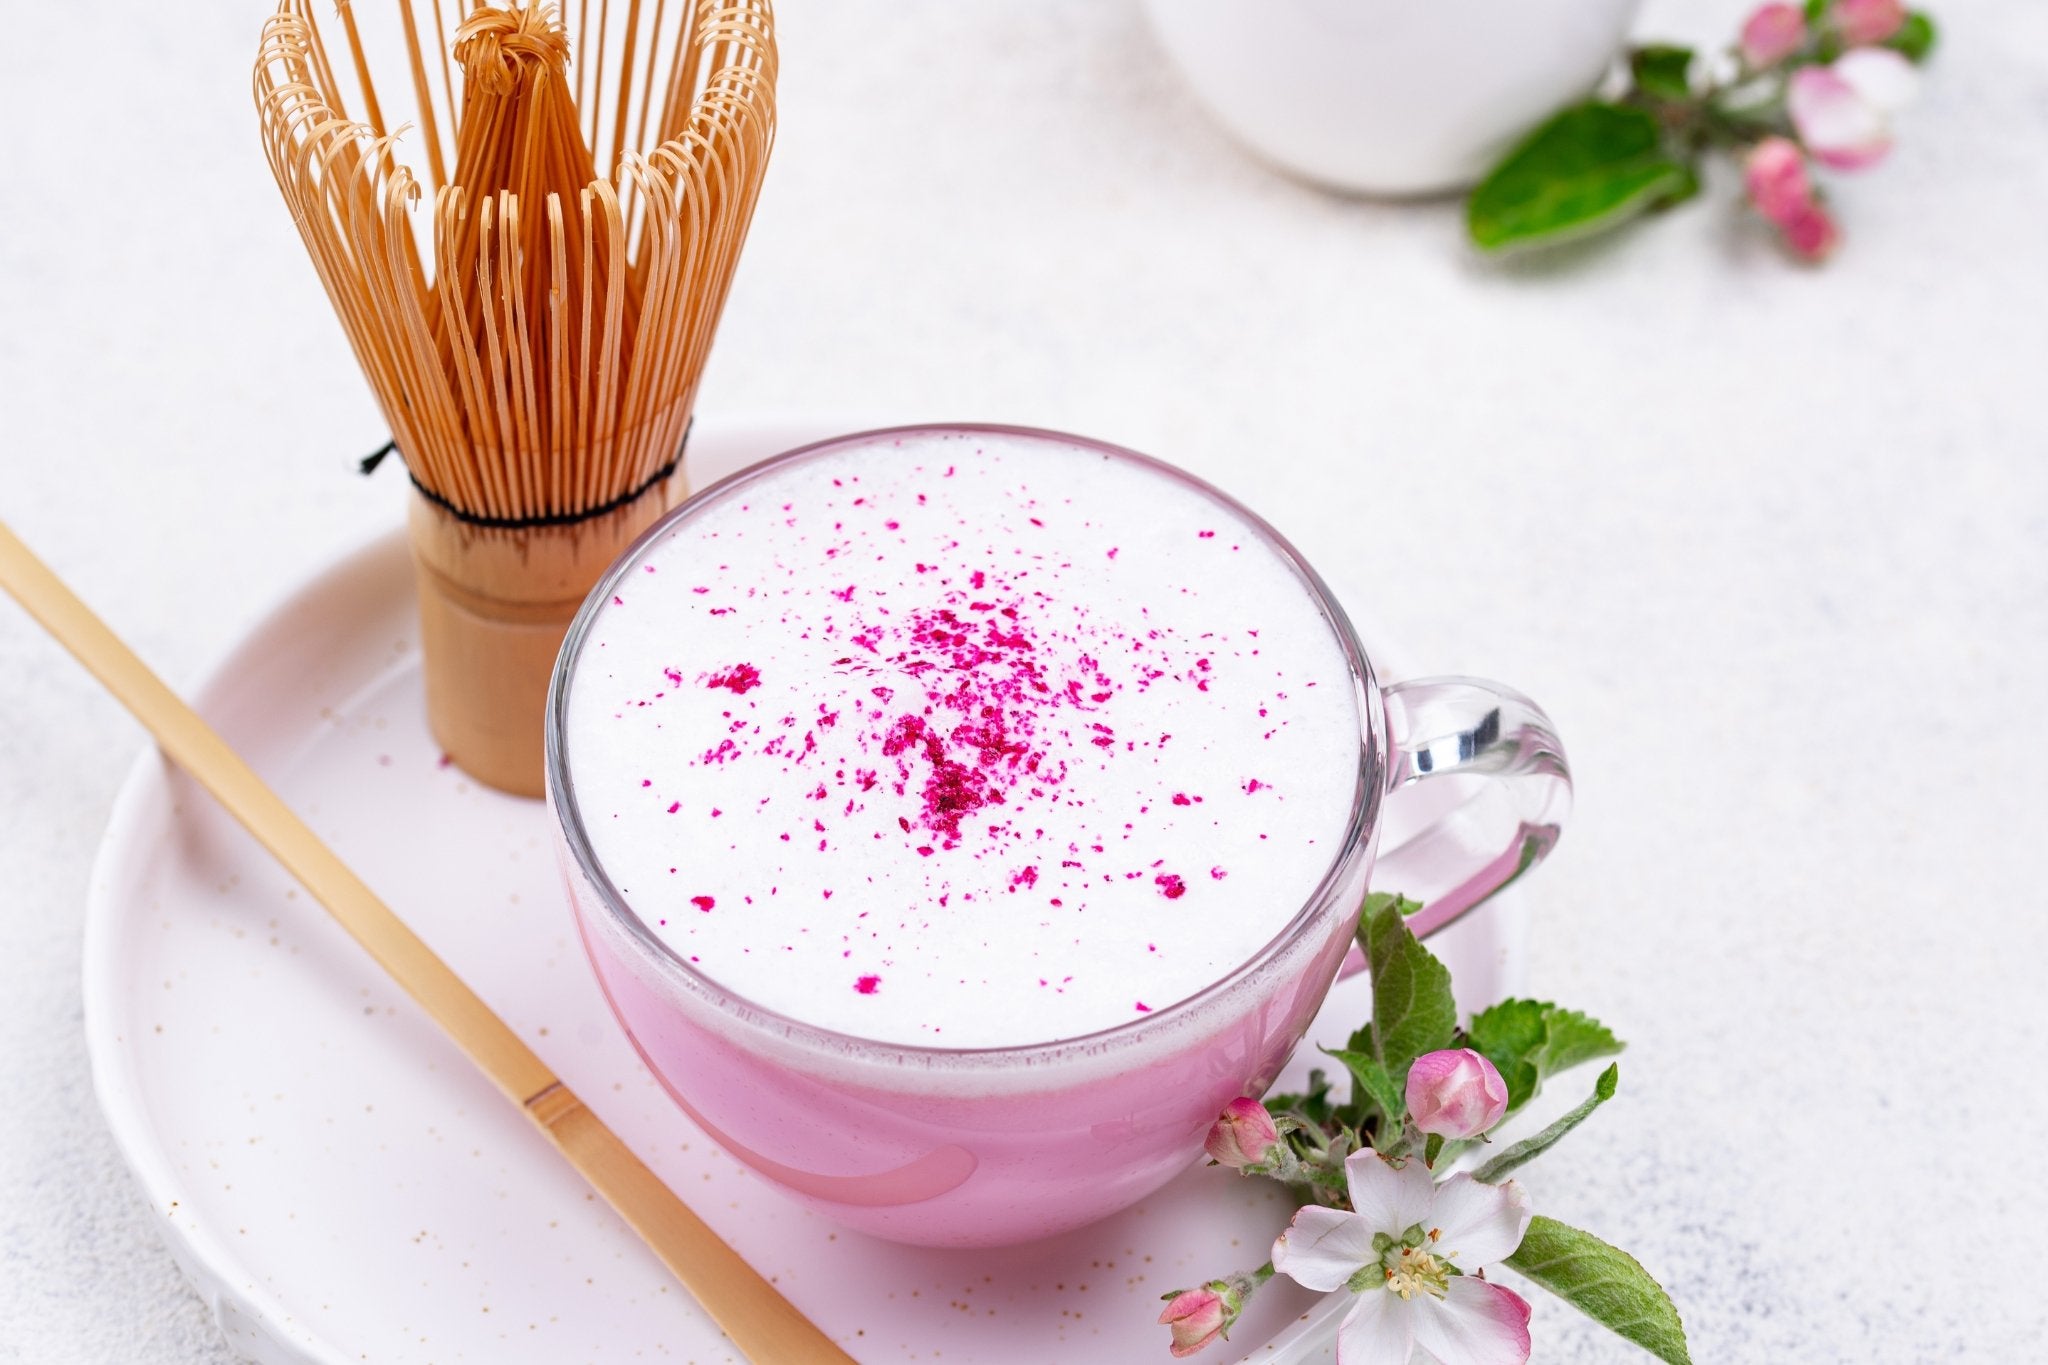 Try This Relaxing, Vibrant Pink Lavender Rose Latte Recipe - Loose Leaf Tea Market